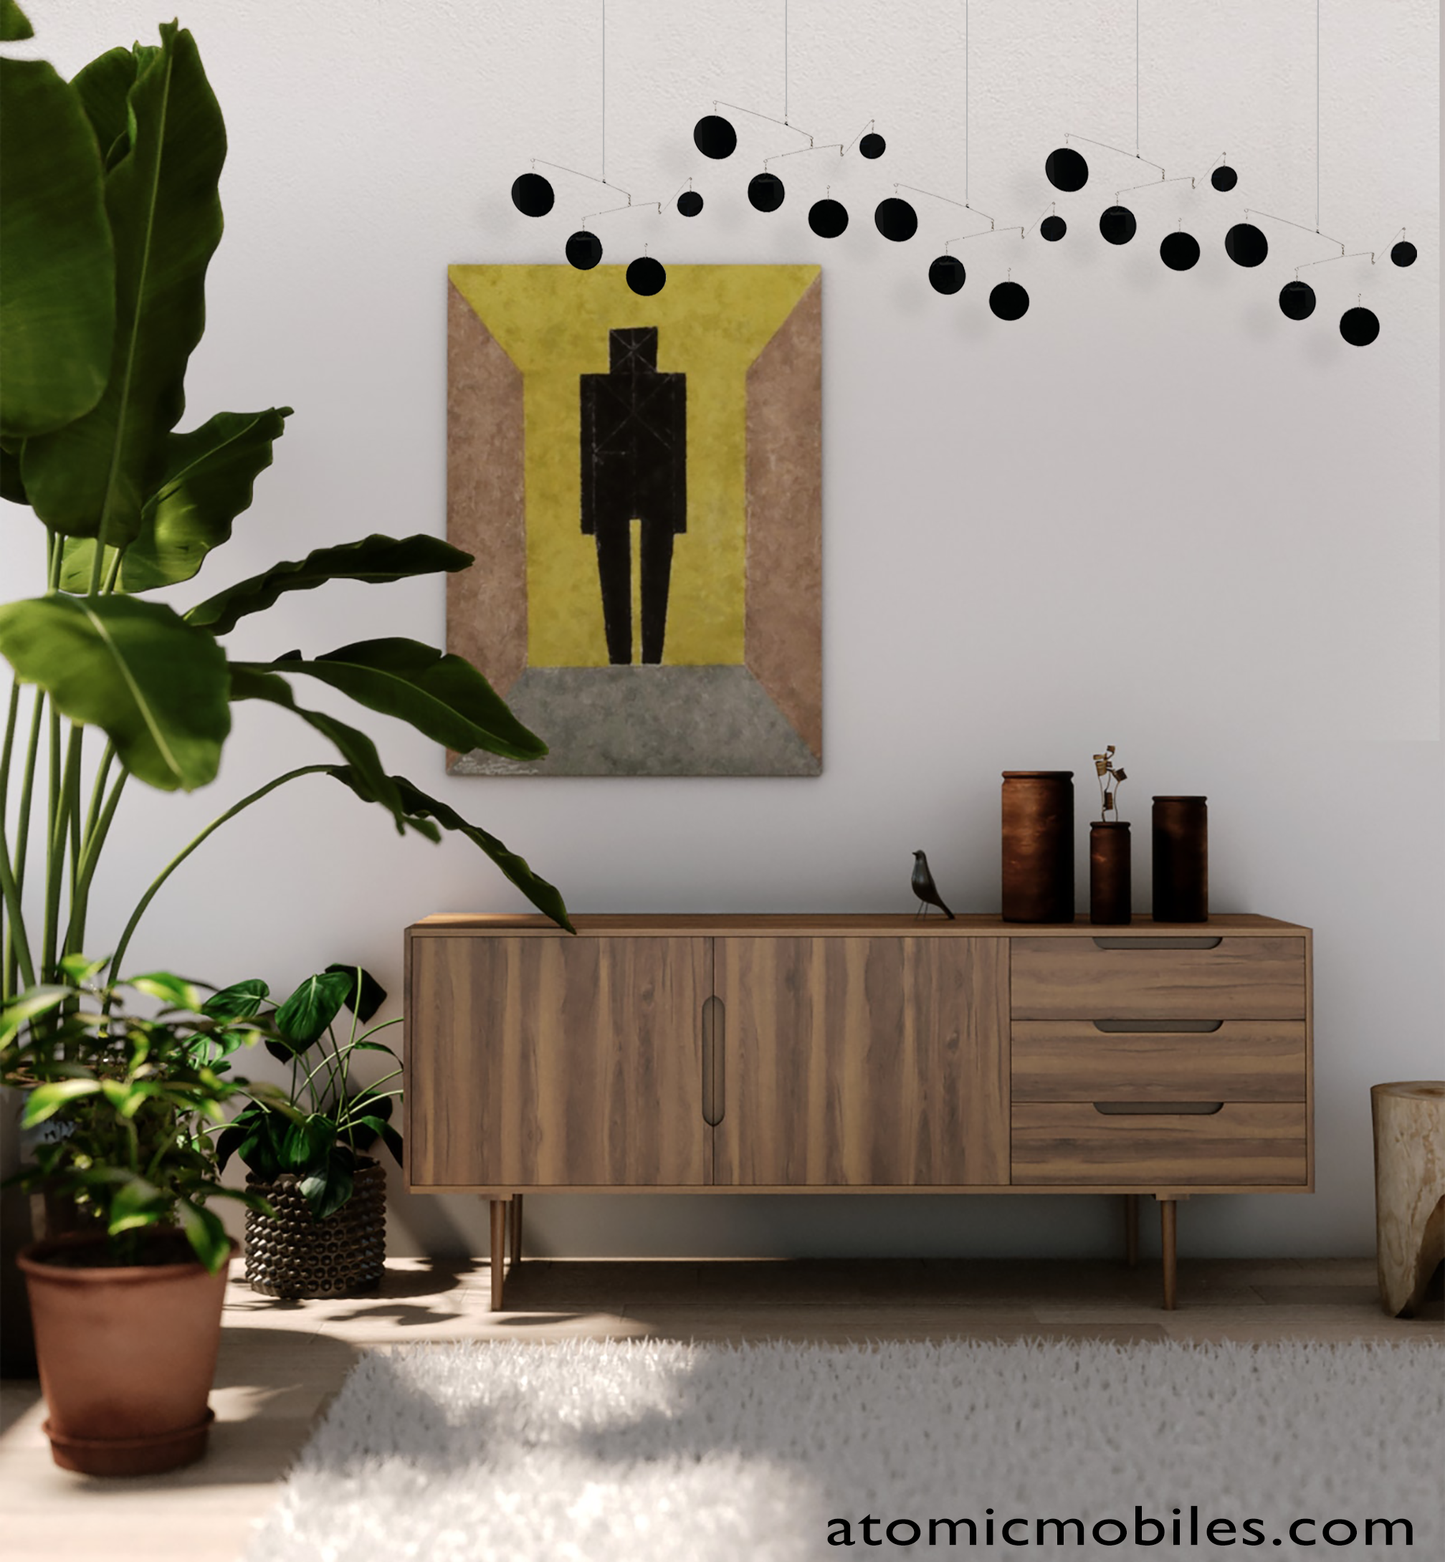 Cool modern Atomic Mobile in black with credenza and plants by AtomicMobiles.com